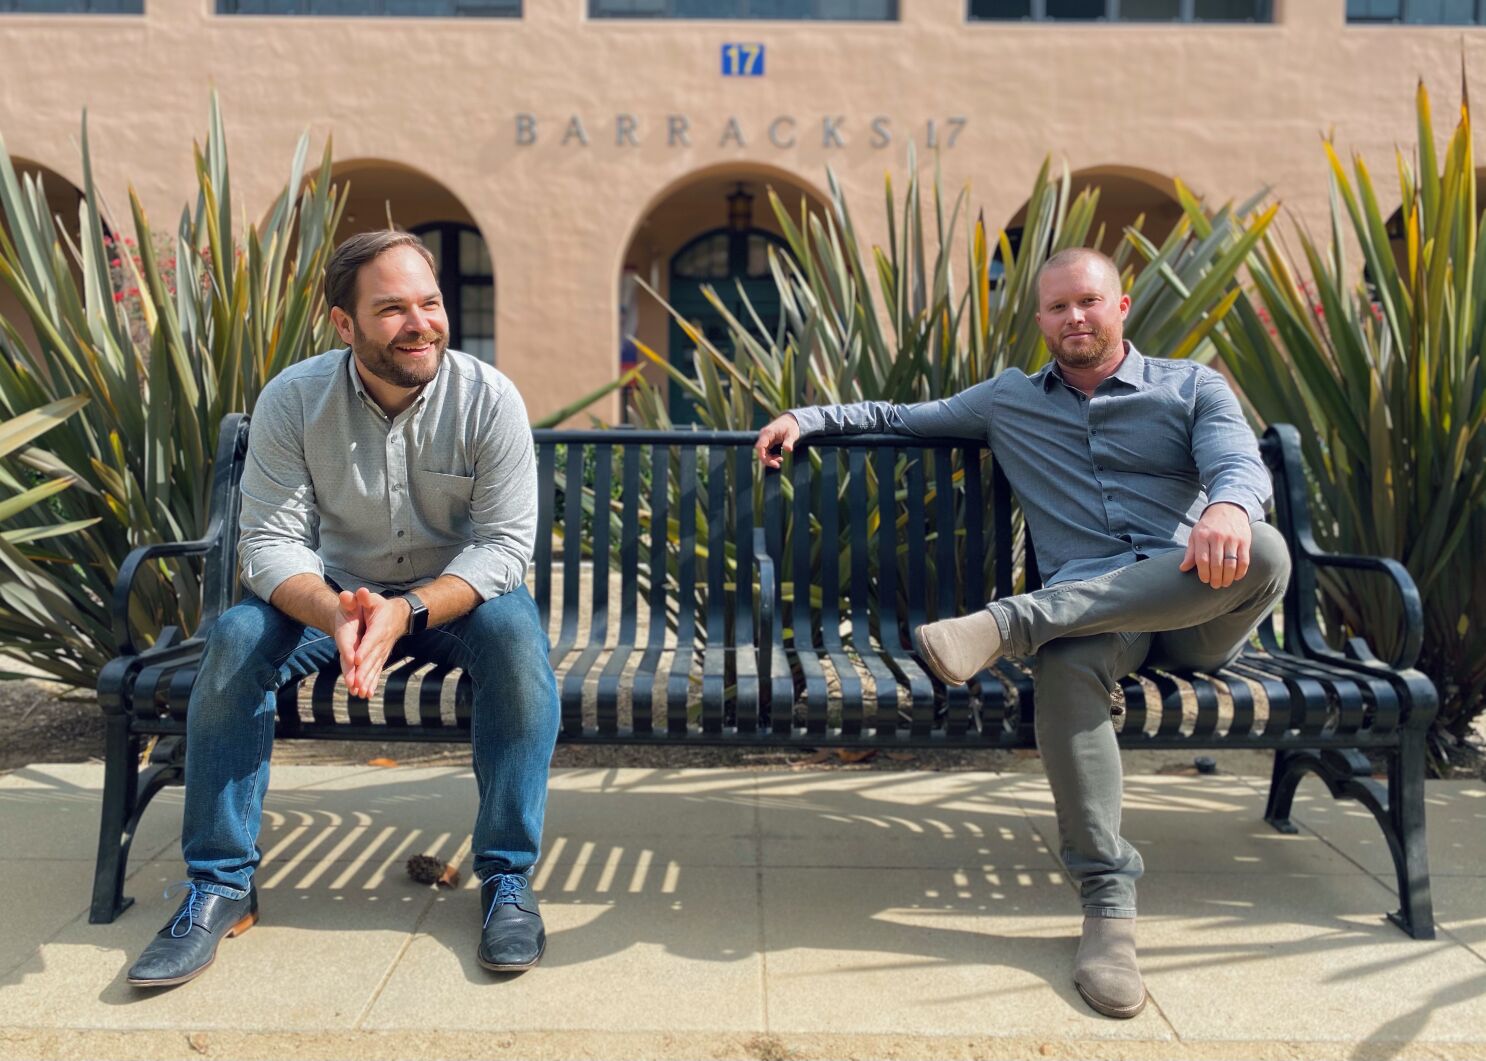 Ex-ServiceNow employees launch tech startup SerenityEHS, funded by former  executives - The San Diego Union-Tribune